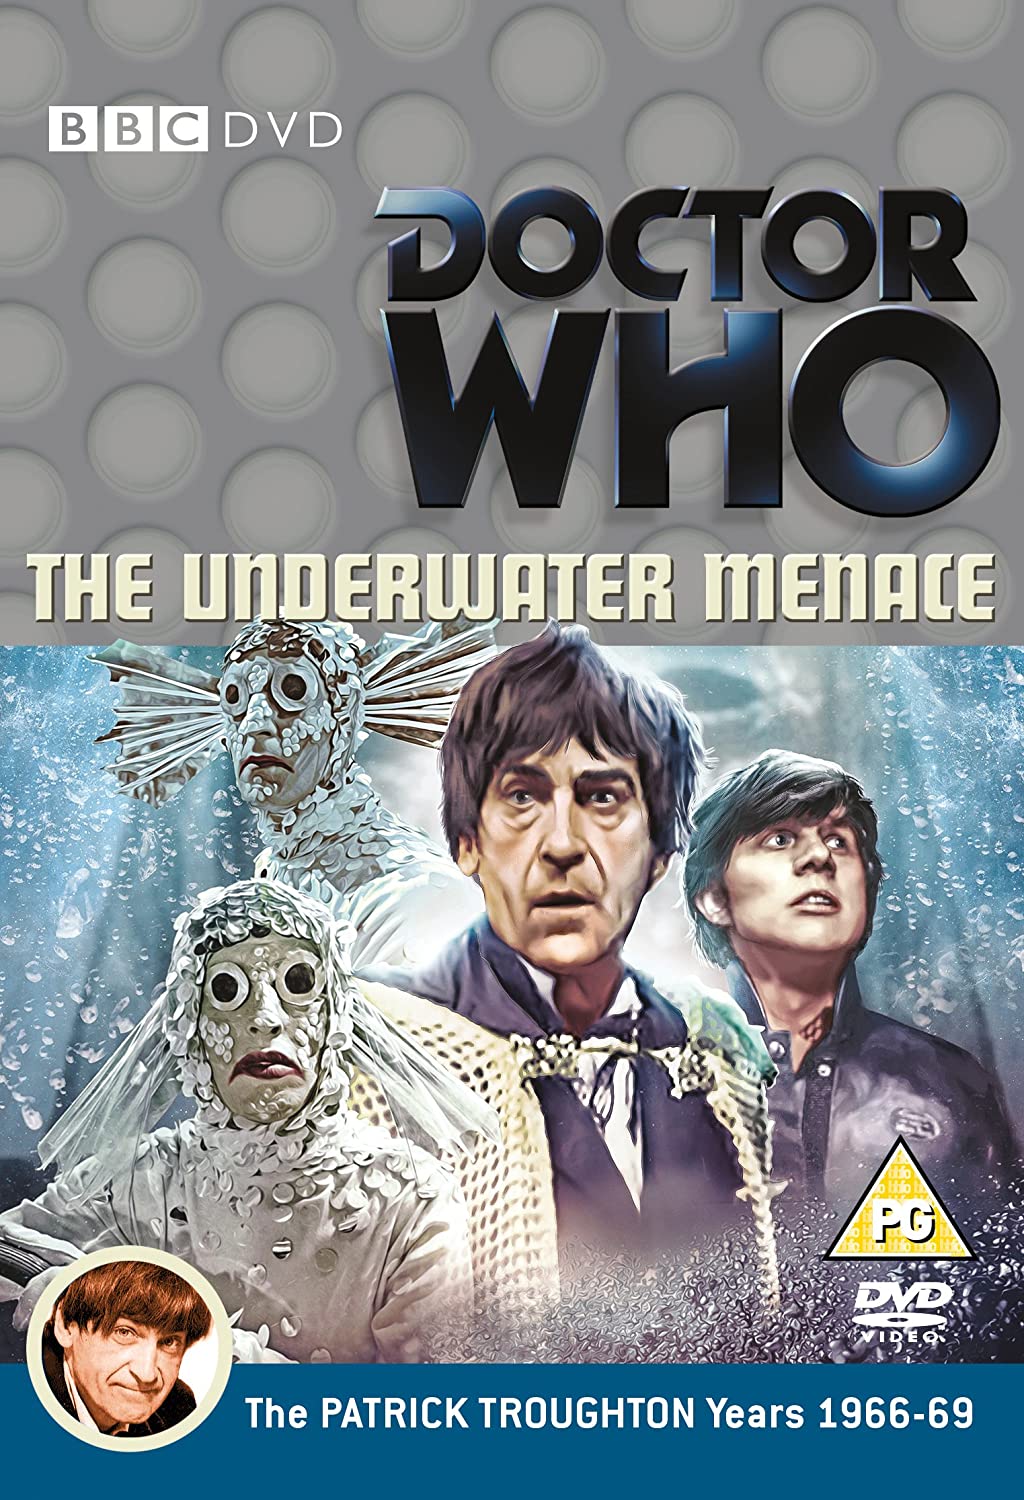 Doctor Who - The Underwater Menace - Sci-fi [DVD]